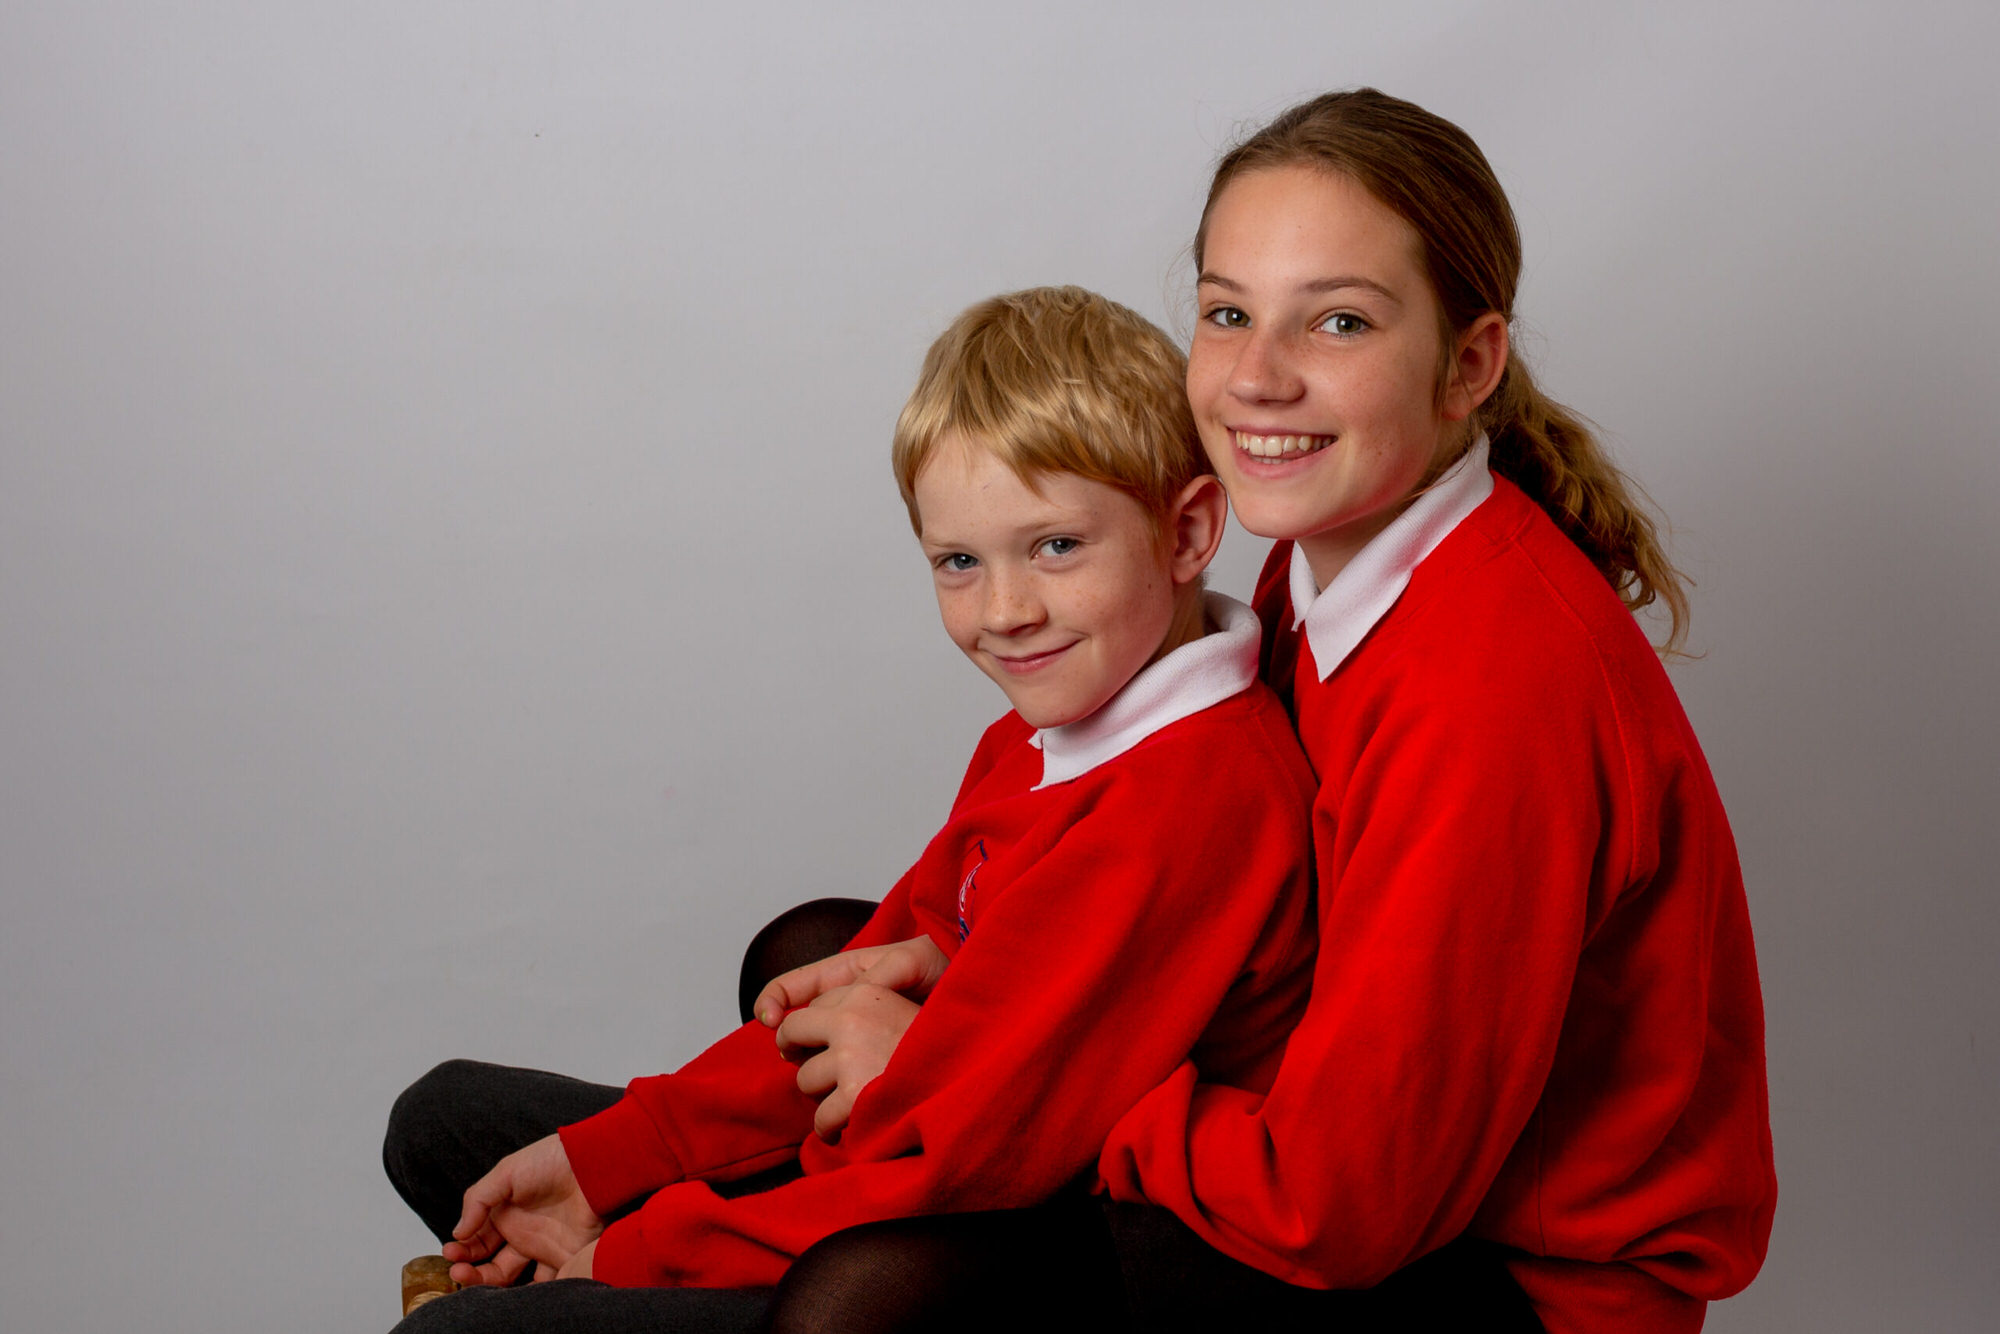 Bespoke School Photo sessions in Sussex